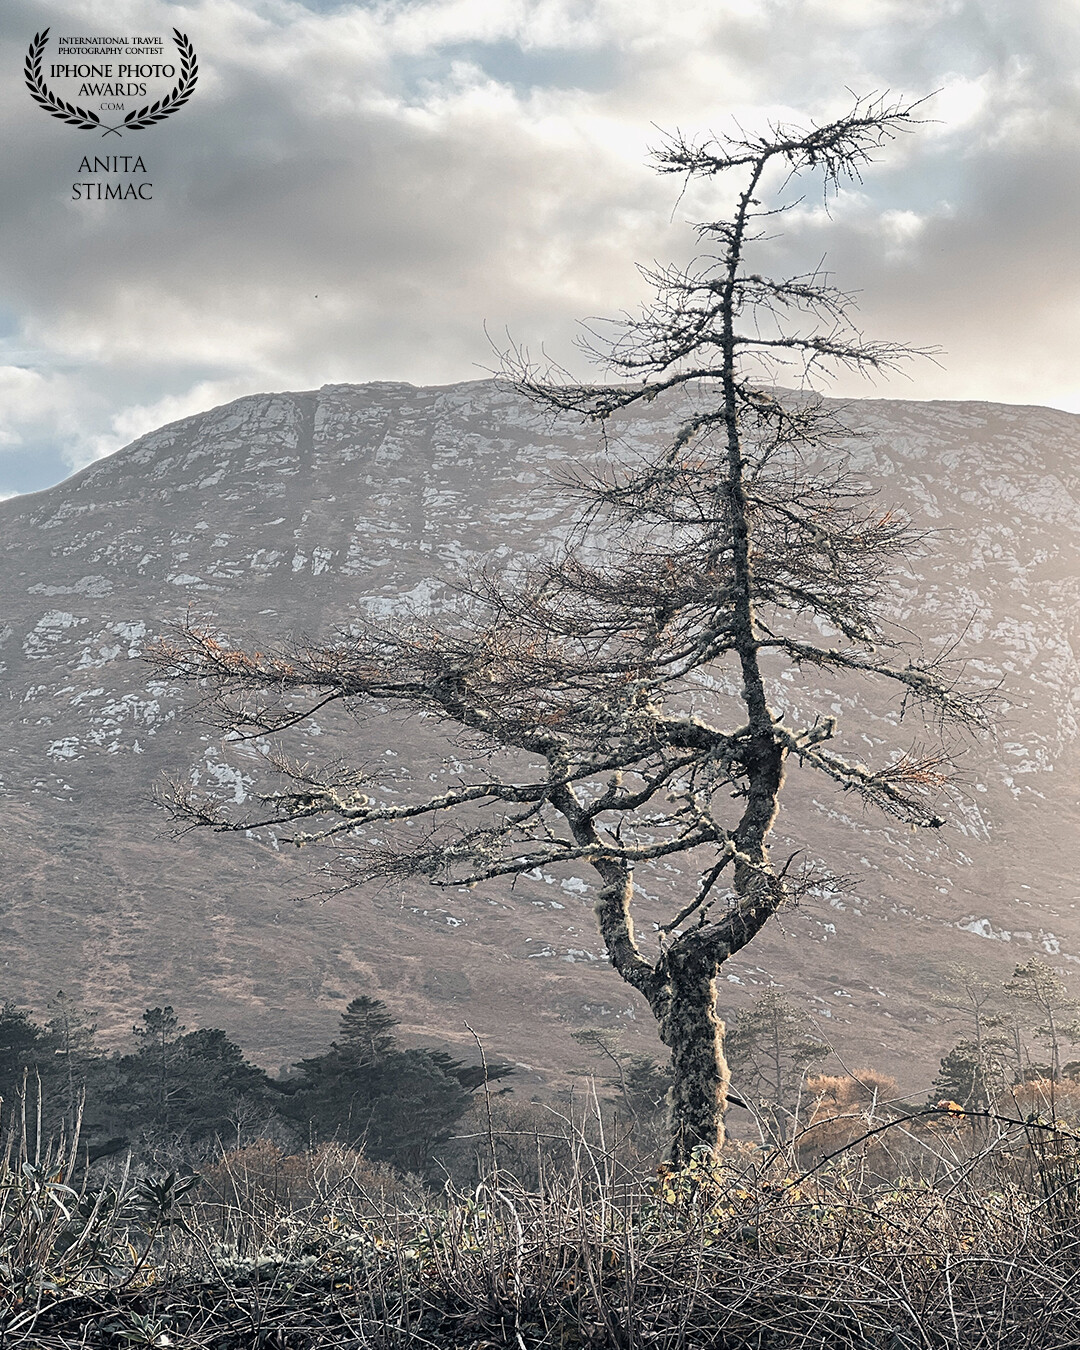 Irish Magic: In the heart of Connemara, this lone tree stands against a majestic mountain backdrop.